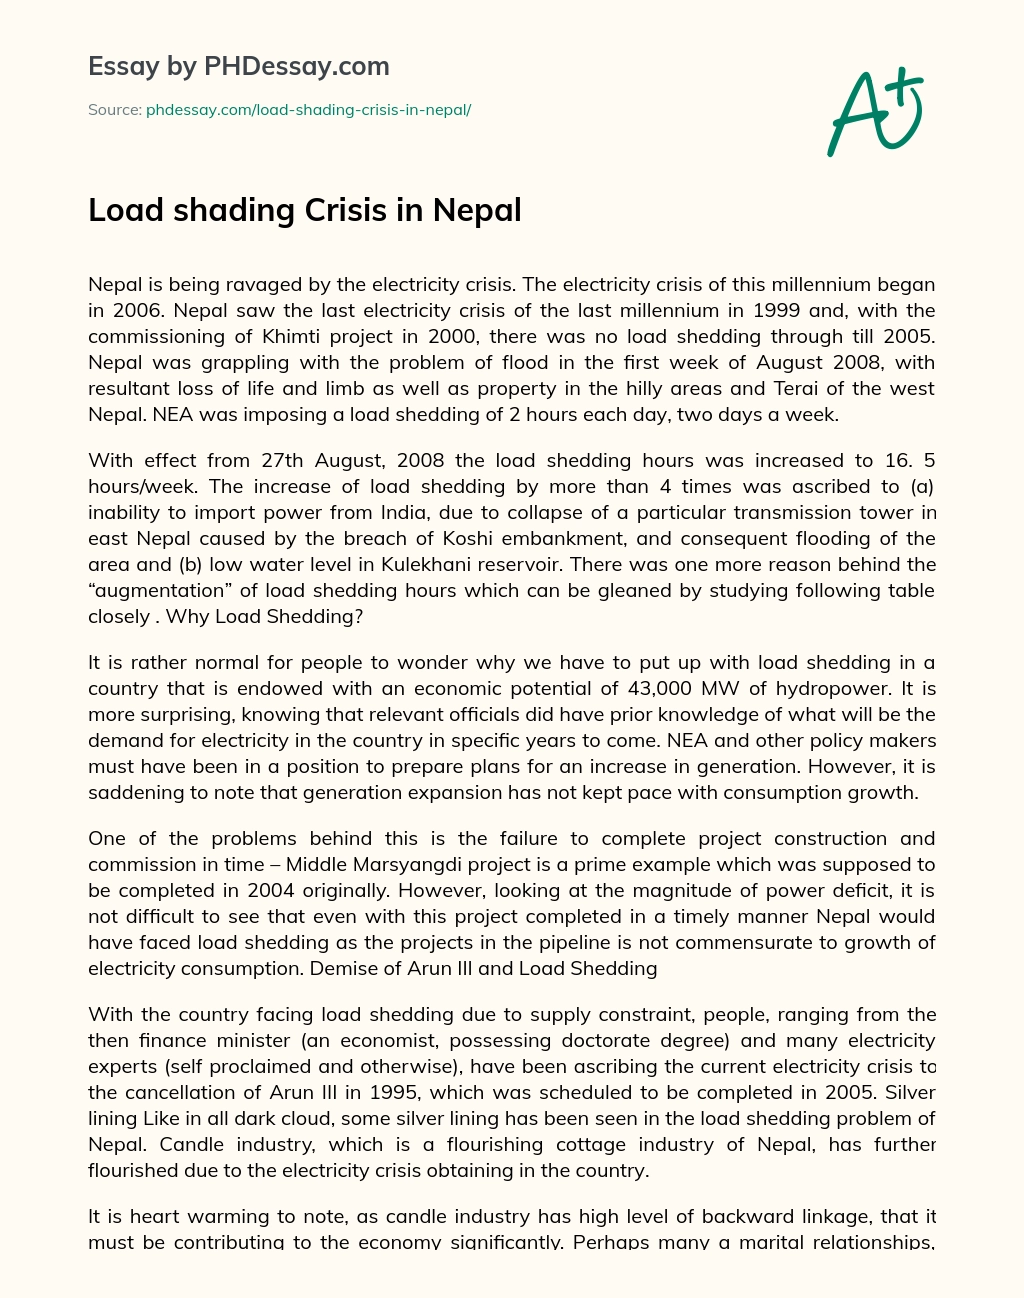 Load shading Crisis in Nepal essay